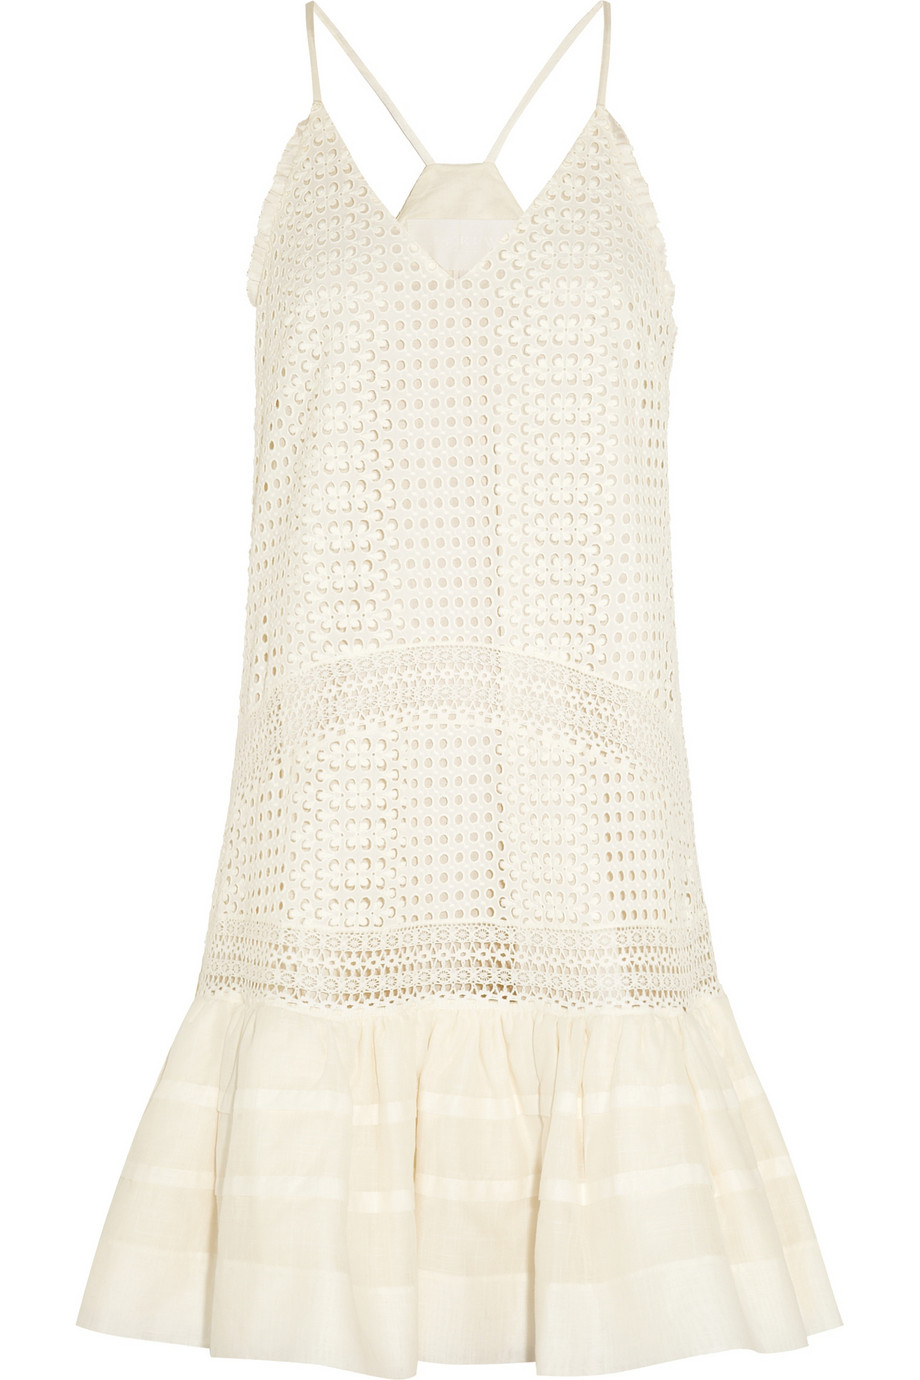 Lyst - J.Crew Broderie Anglaise Cotton Dress in White